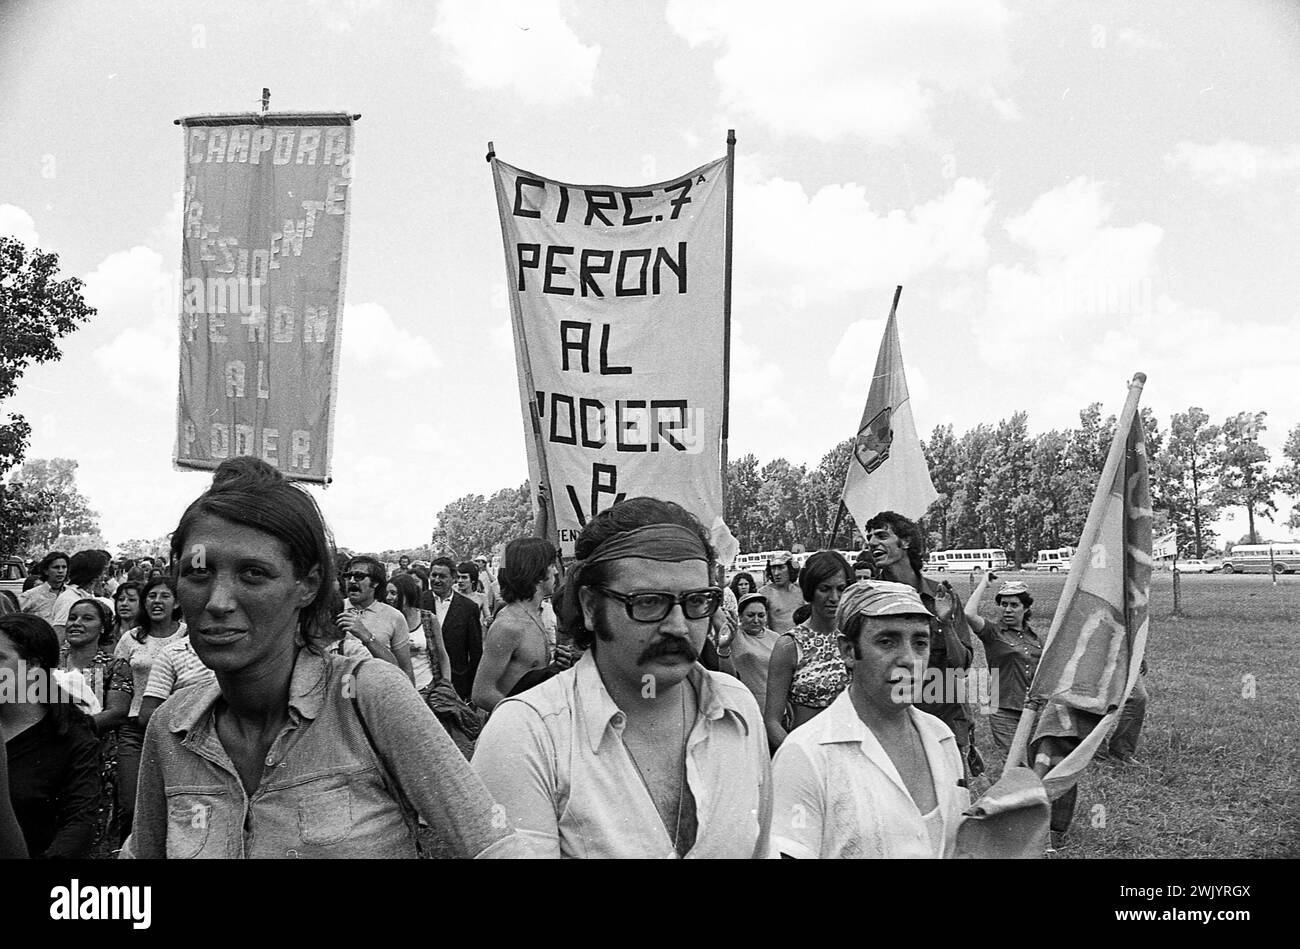 'Perón al poder' (Peron to power) sign: the complete slogan is 'Cámpora al gobierno, Perón al poder' (Campora for President, Peron to power). A Peronist followers gathering for the 'Cámpora-Solano Lima' ticket proclamation at the March 1973 upcoming general elections, San Antonio de Areco, Buenos Aires, Argentina, January 22nd, 1973.l Stock Photo